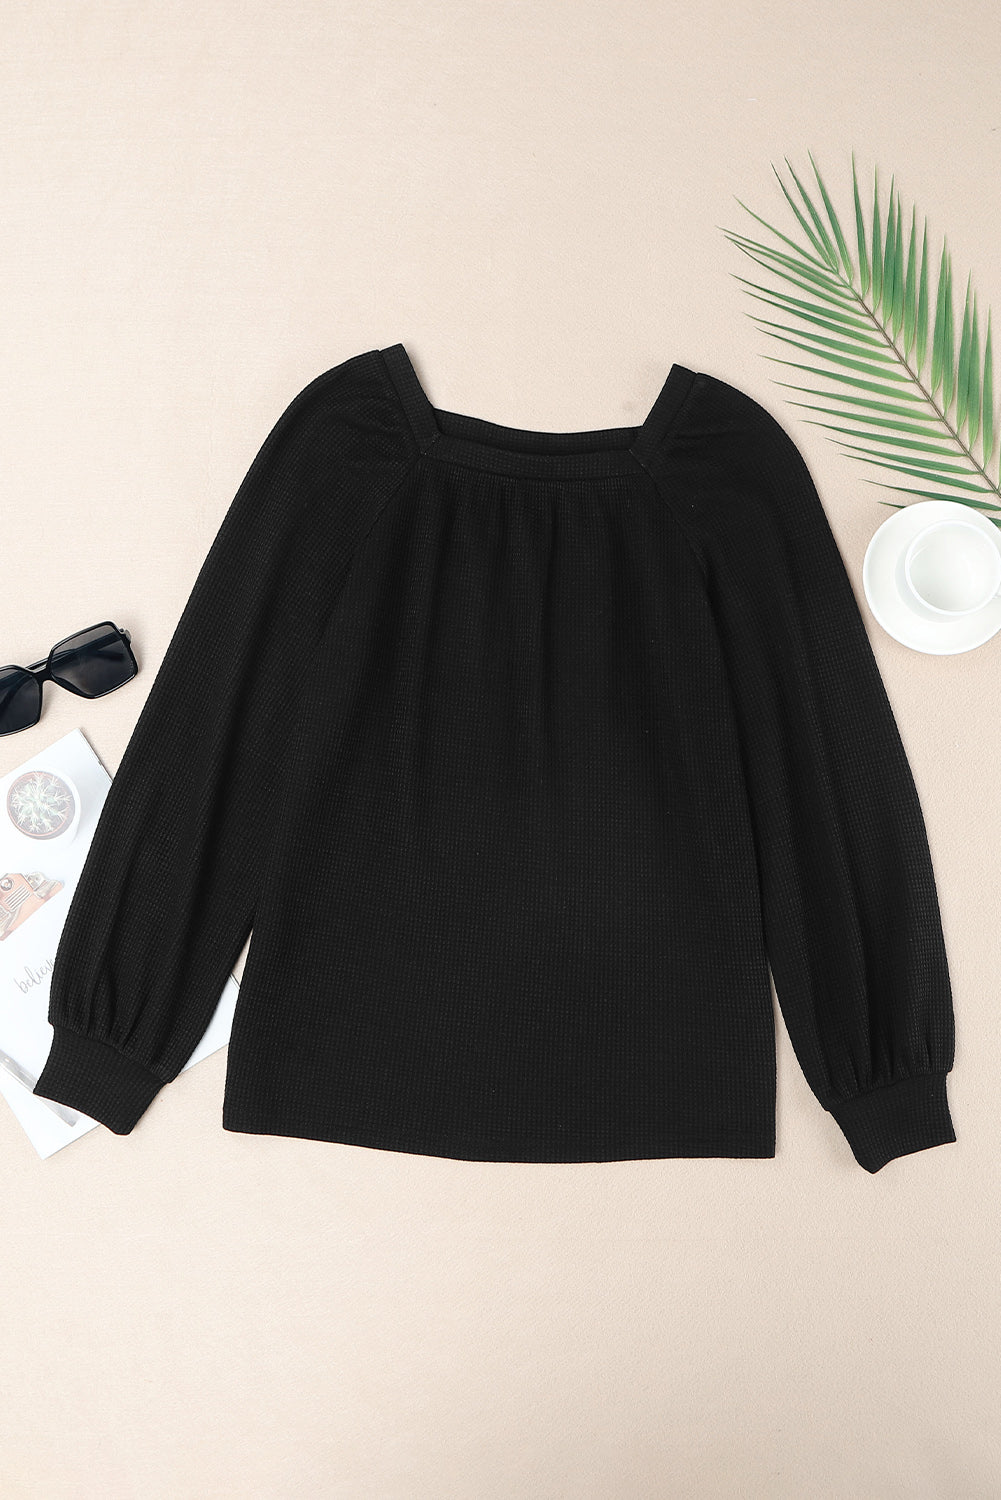 Square Neck Puff Sleeve Waffle Knit Top